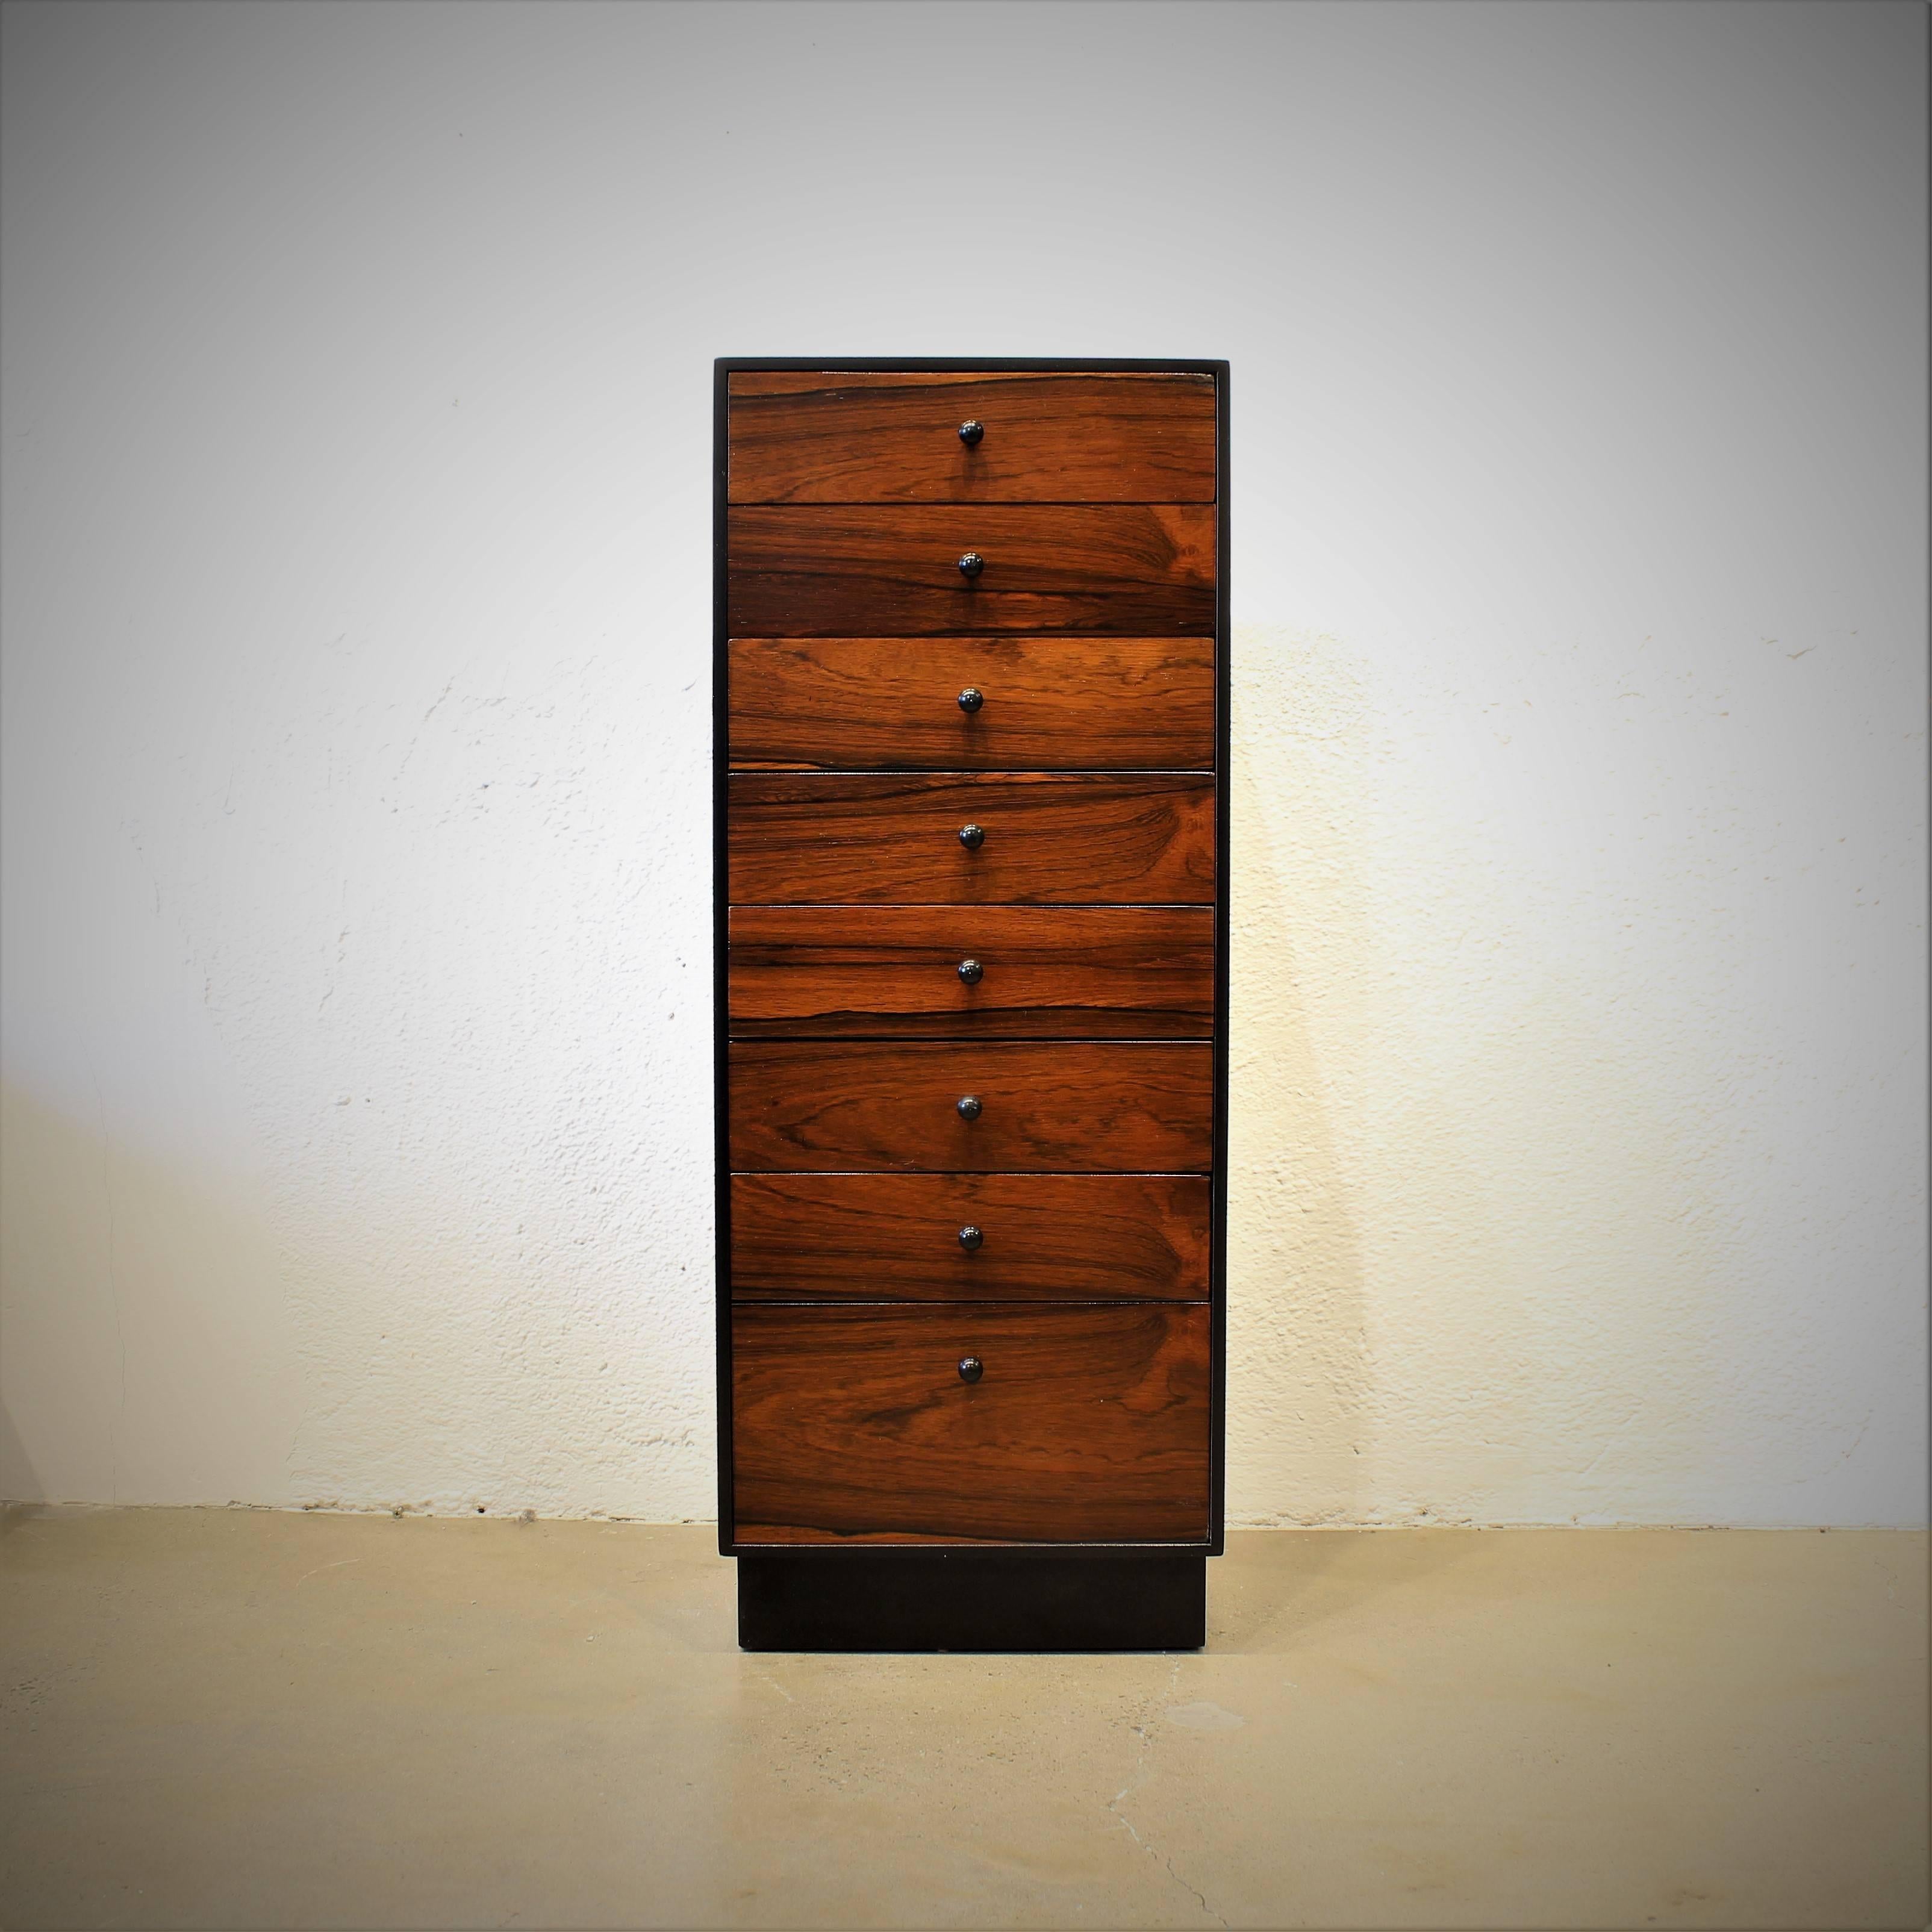 This rare ebonized and rosewood lingerie chest by Harvey Probber is absolutely gorgeous and very functional! It can be used as a lingerie, silver or jewelry chest. The fine rosewood grain is flawless and well matched.